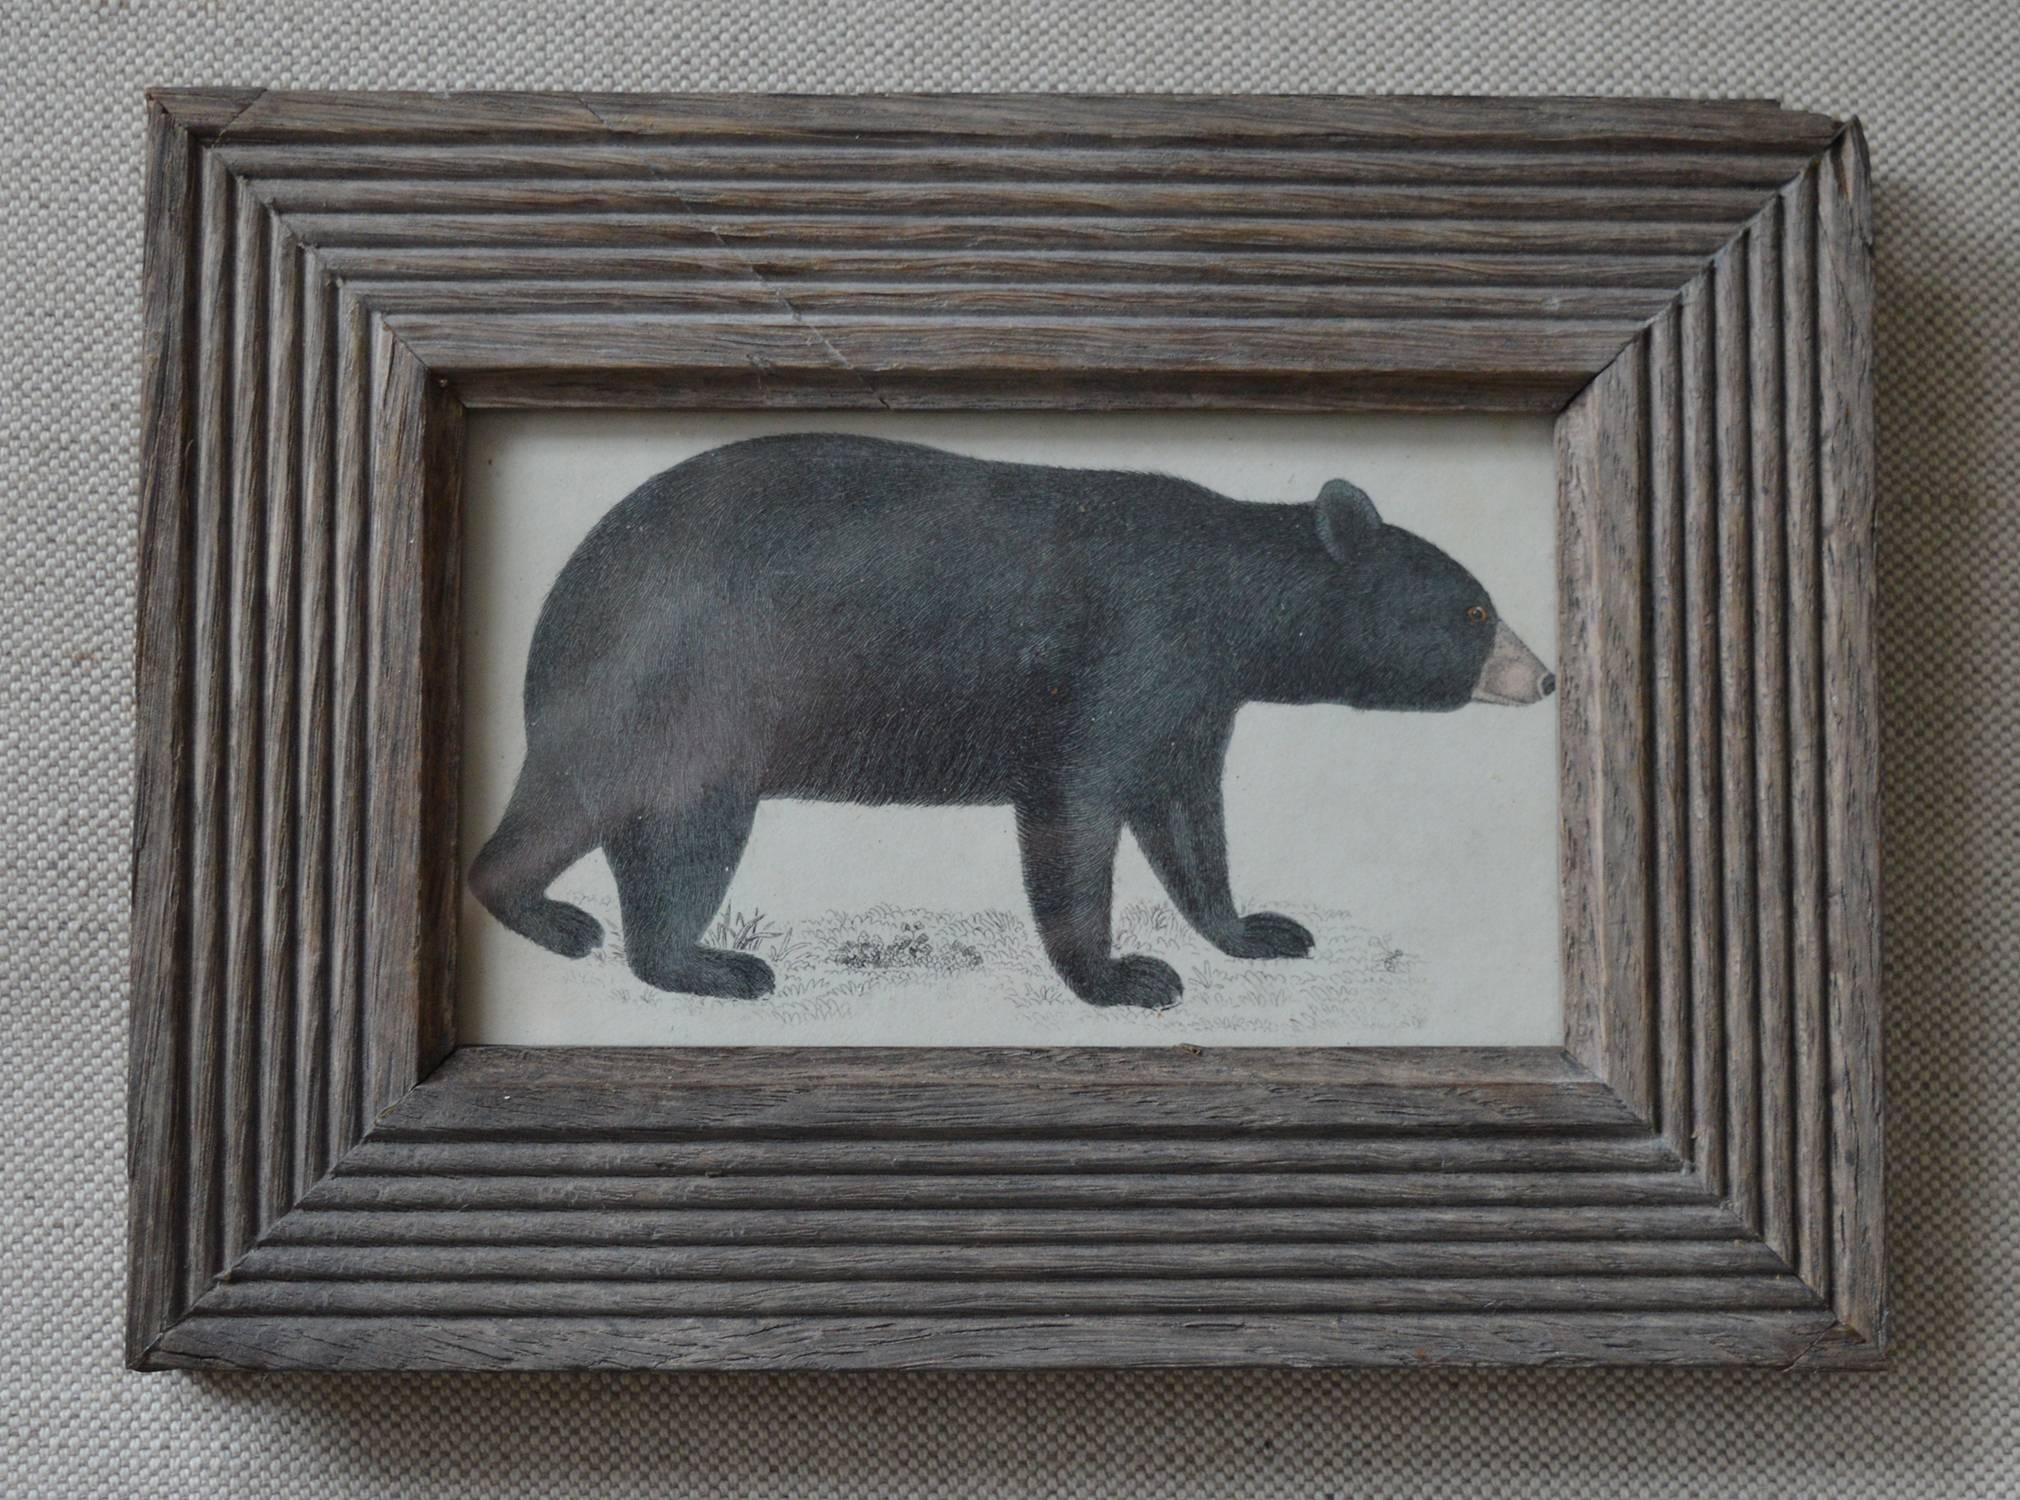 Charming print of a bear.

Hand-colored steel engraving in a distressed carved oak frame of the same period.

Original color.

Published by Fullarton, London, circa 1850.